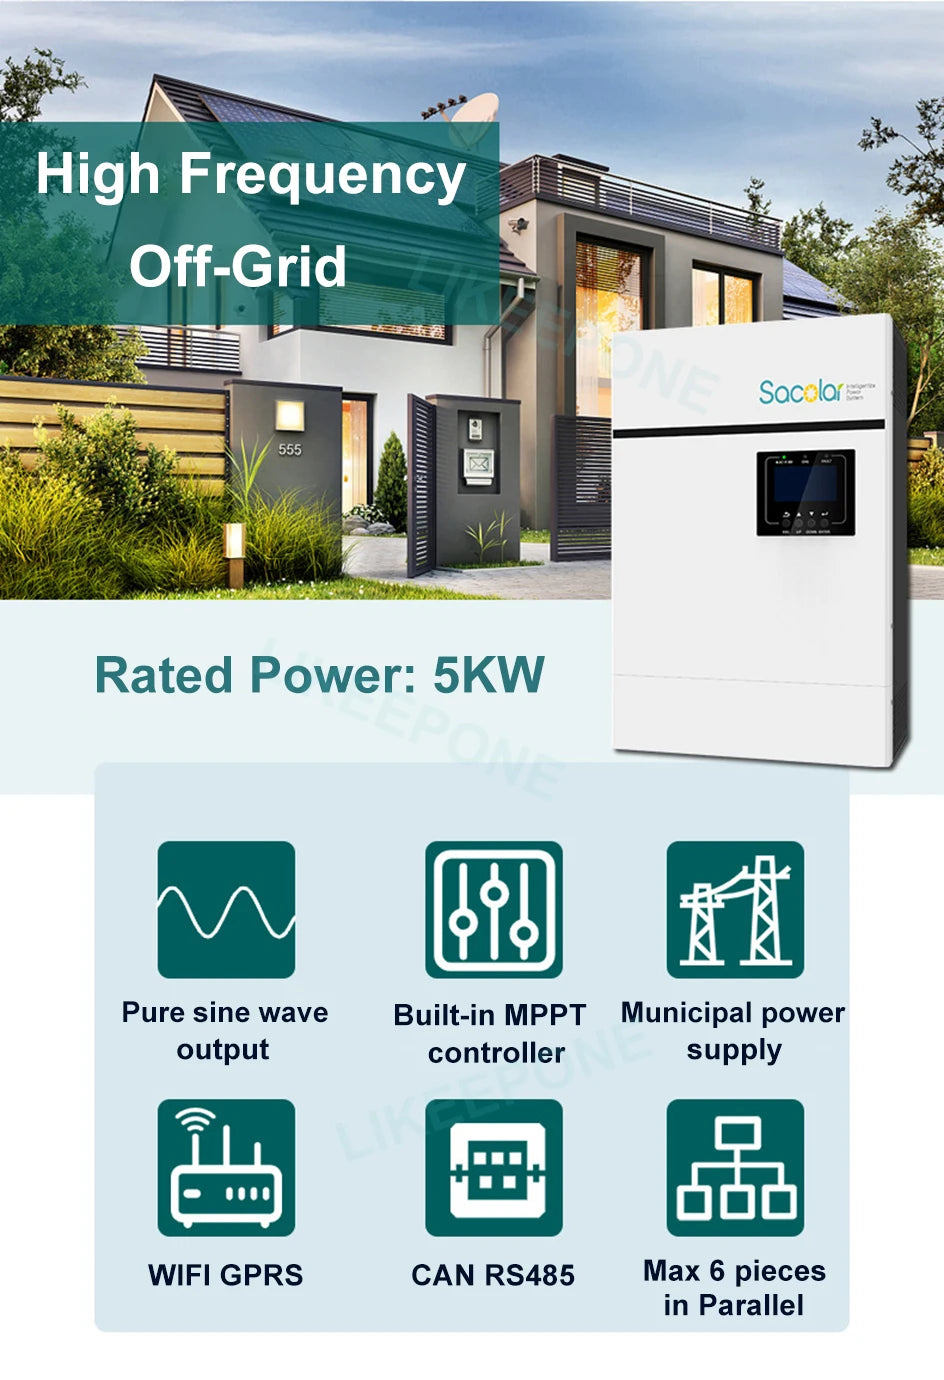 New 48V 5Kw 3.5Kw Inverter, Off-grid solar system with advanced features like Wi-Fi/GPRS connectivity and parallel connections.